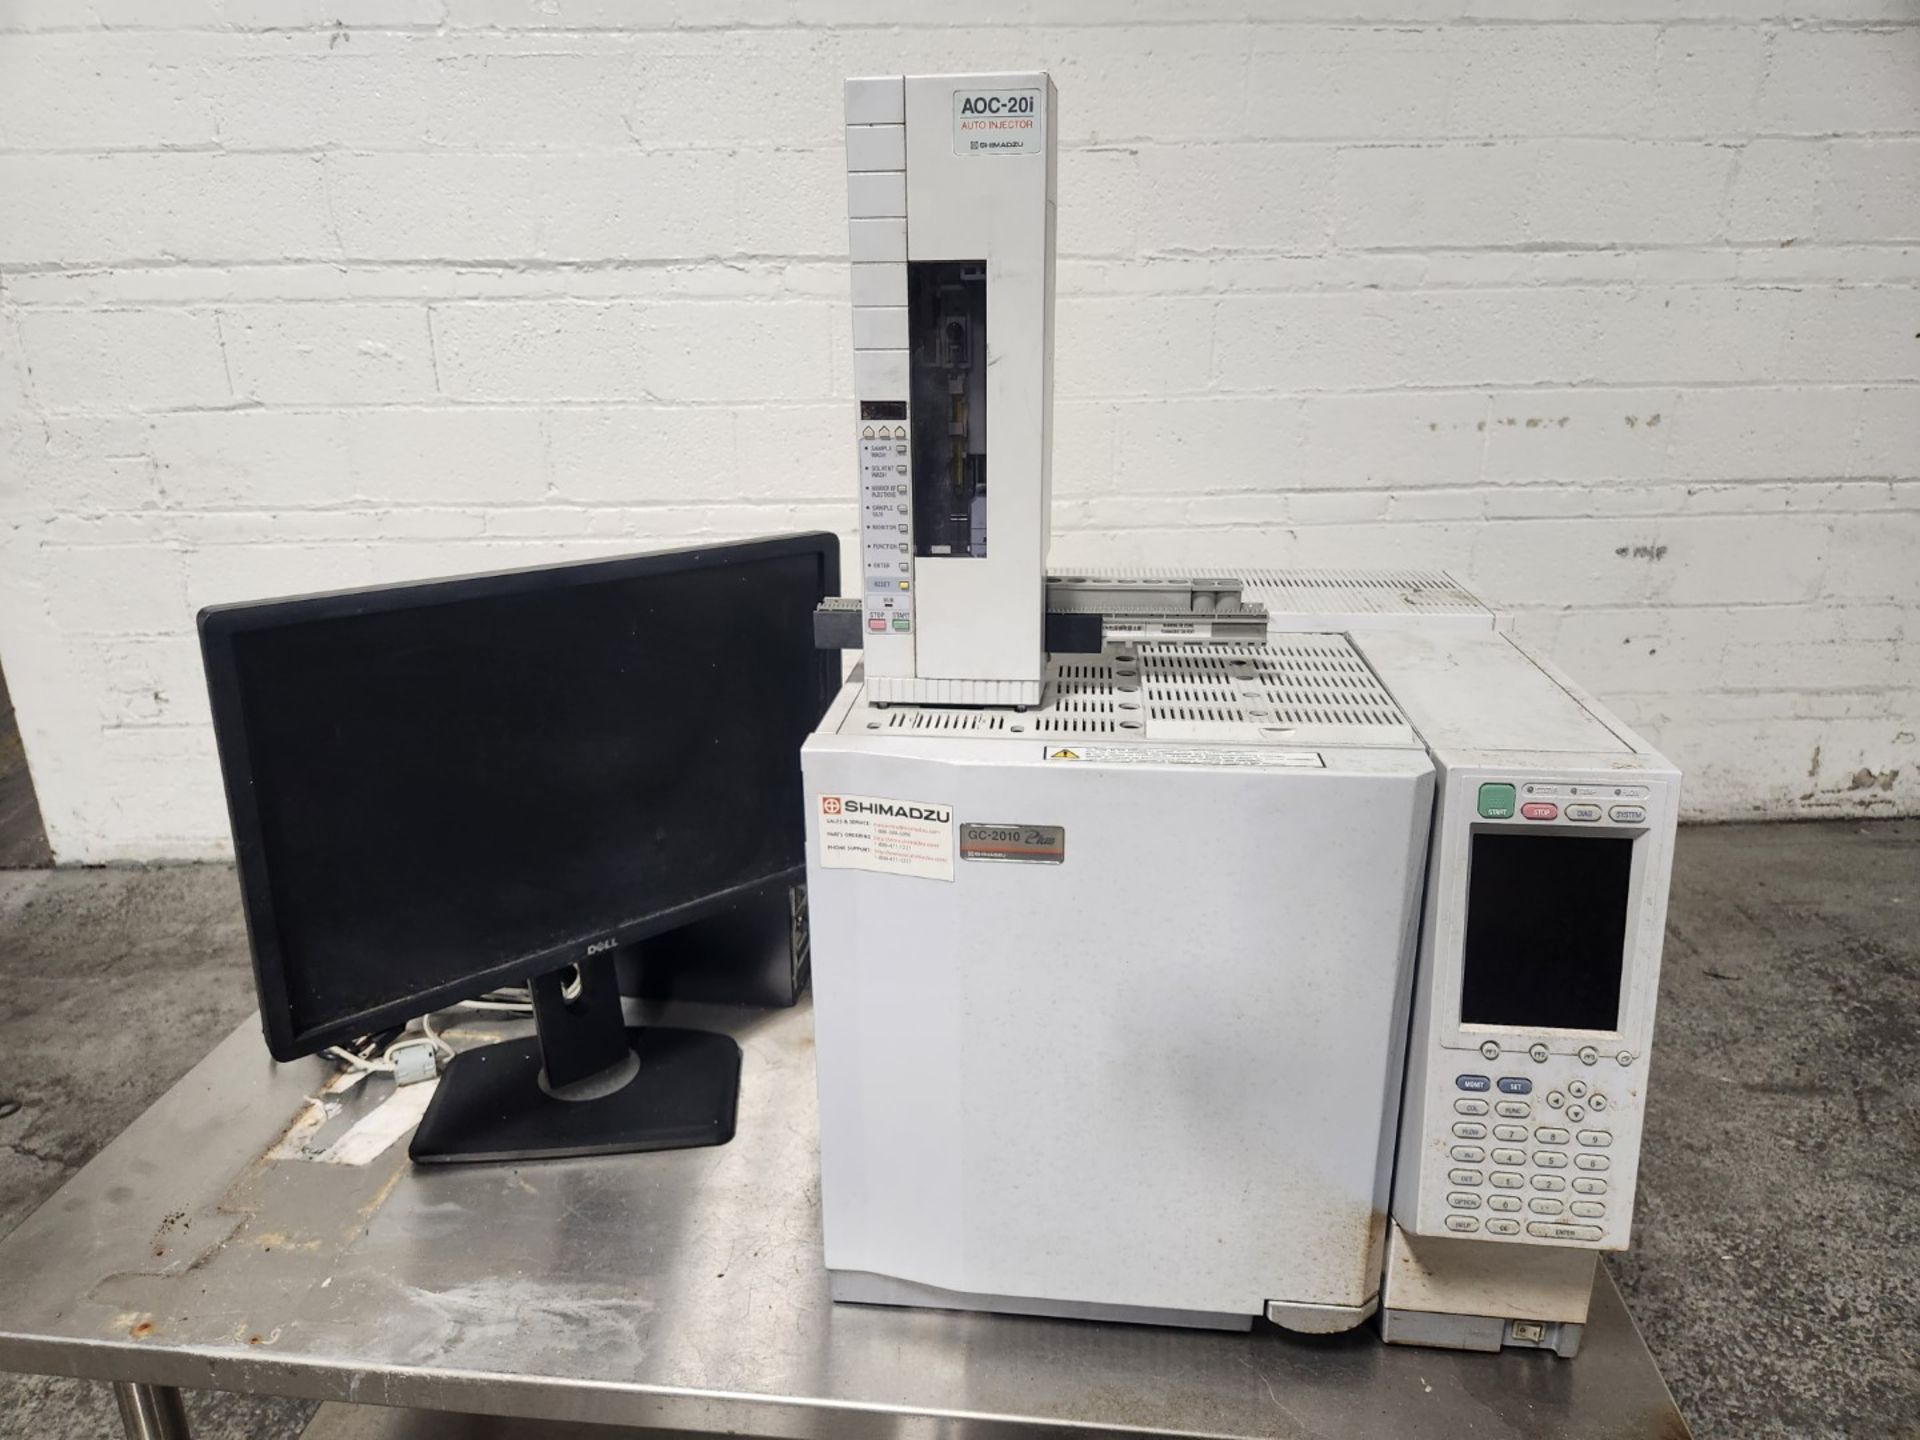 Shimadzu gas chromatograph, model GC-2010 Plus, with AOC-20i auto injector and Dell P/C. (TAG #